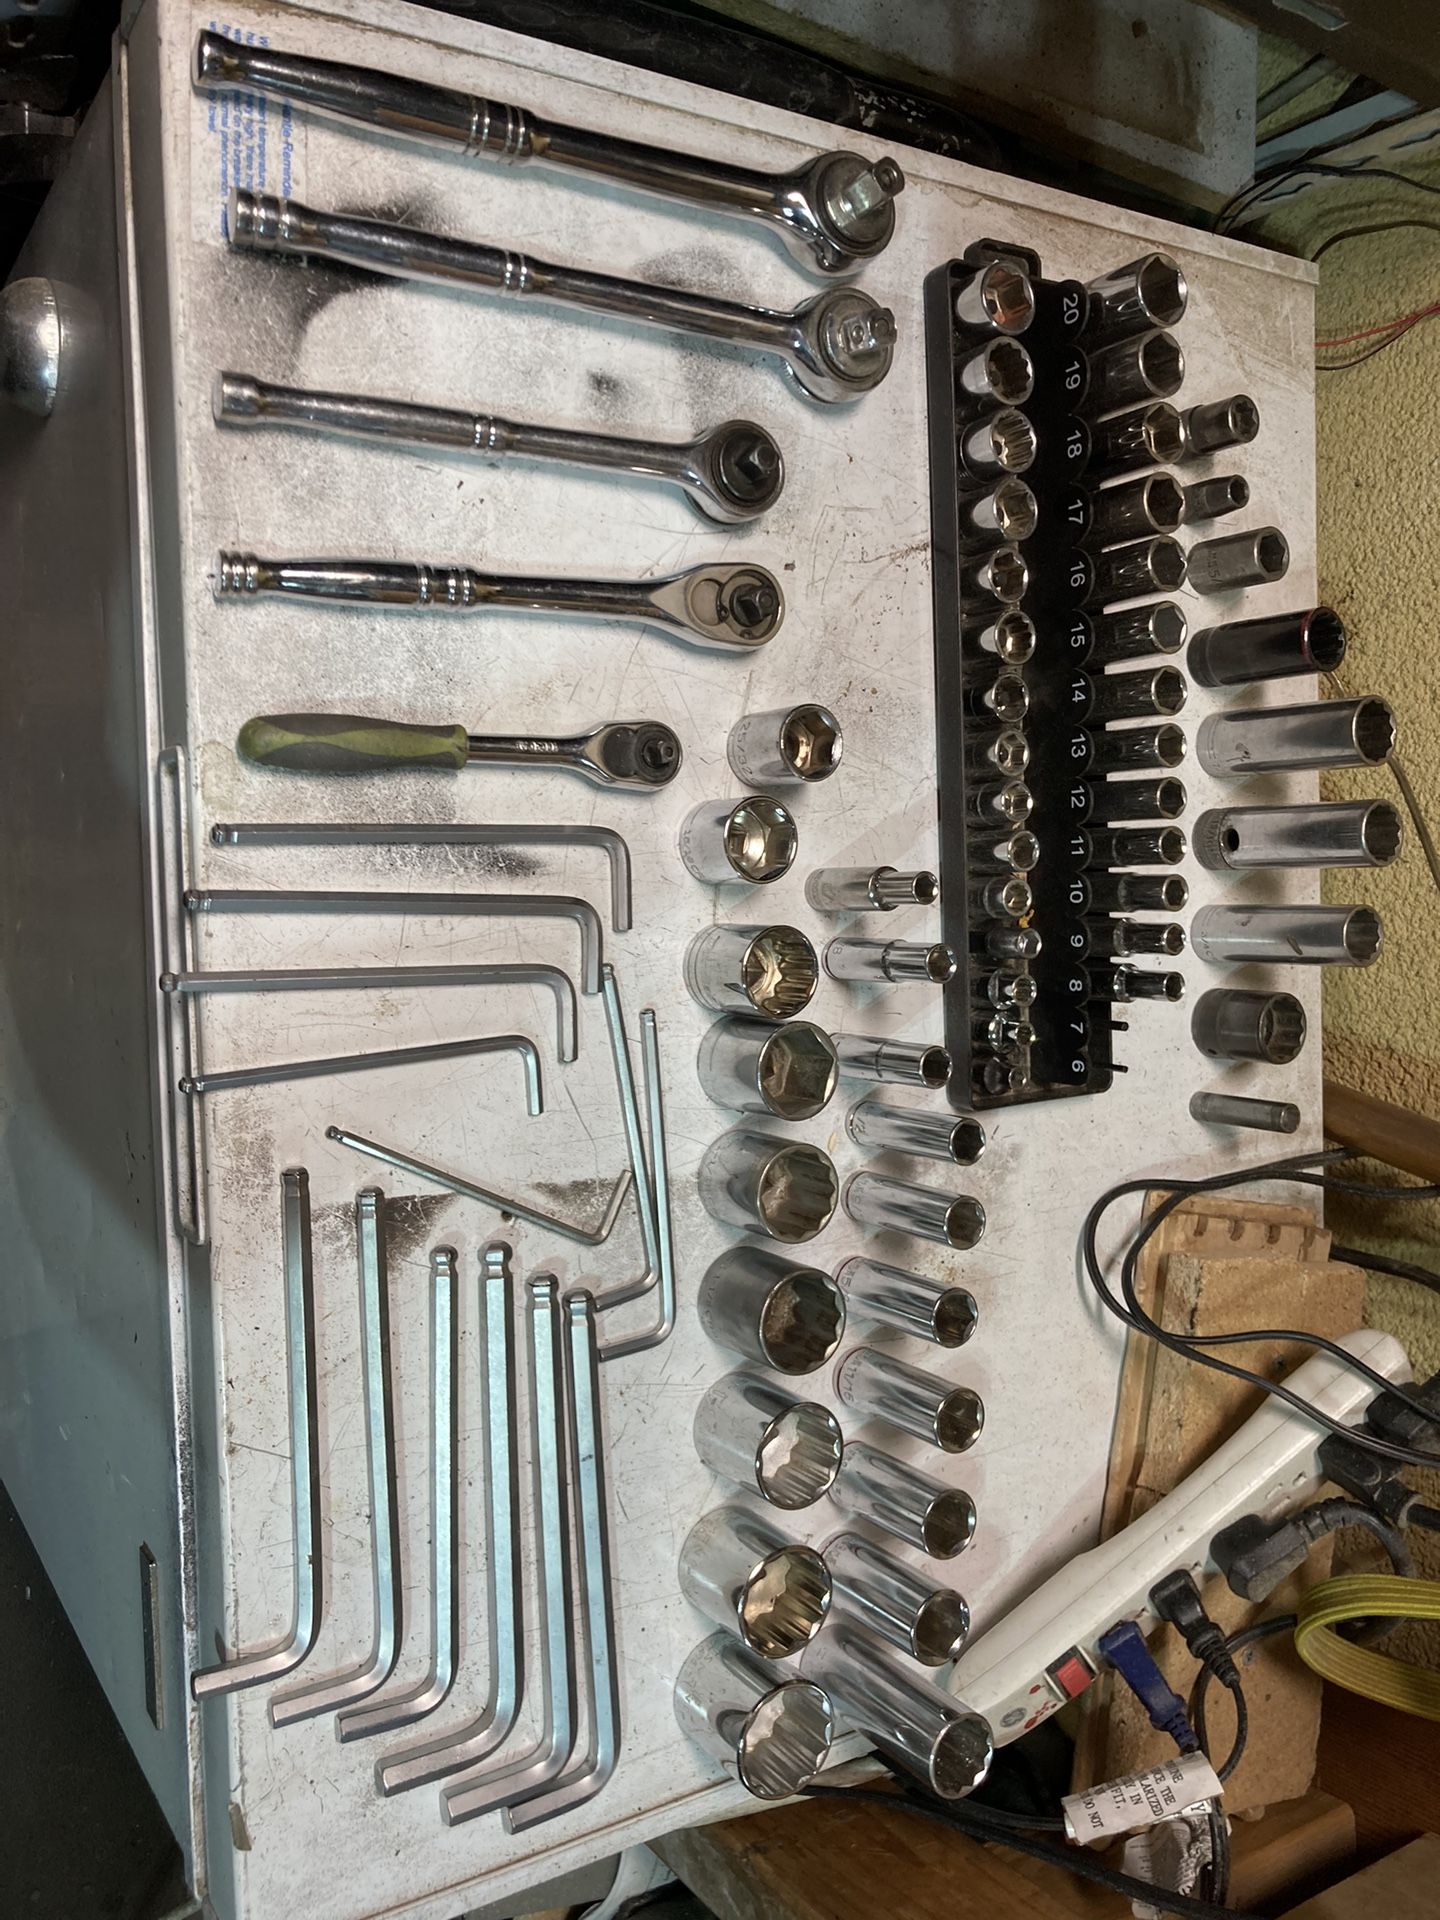 Socket Wrenches, Allen Wrenches, And All Different Types Of Sockets